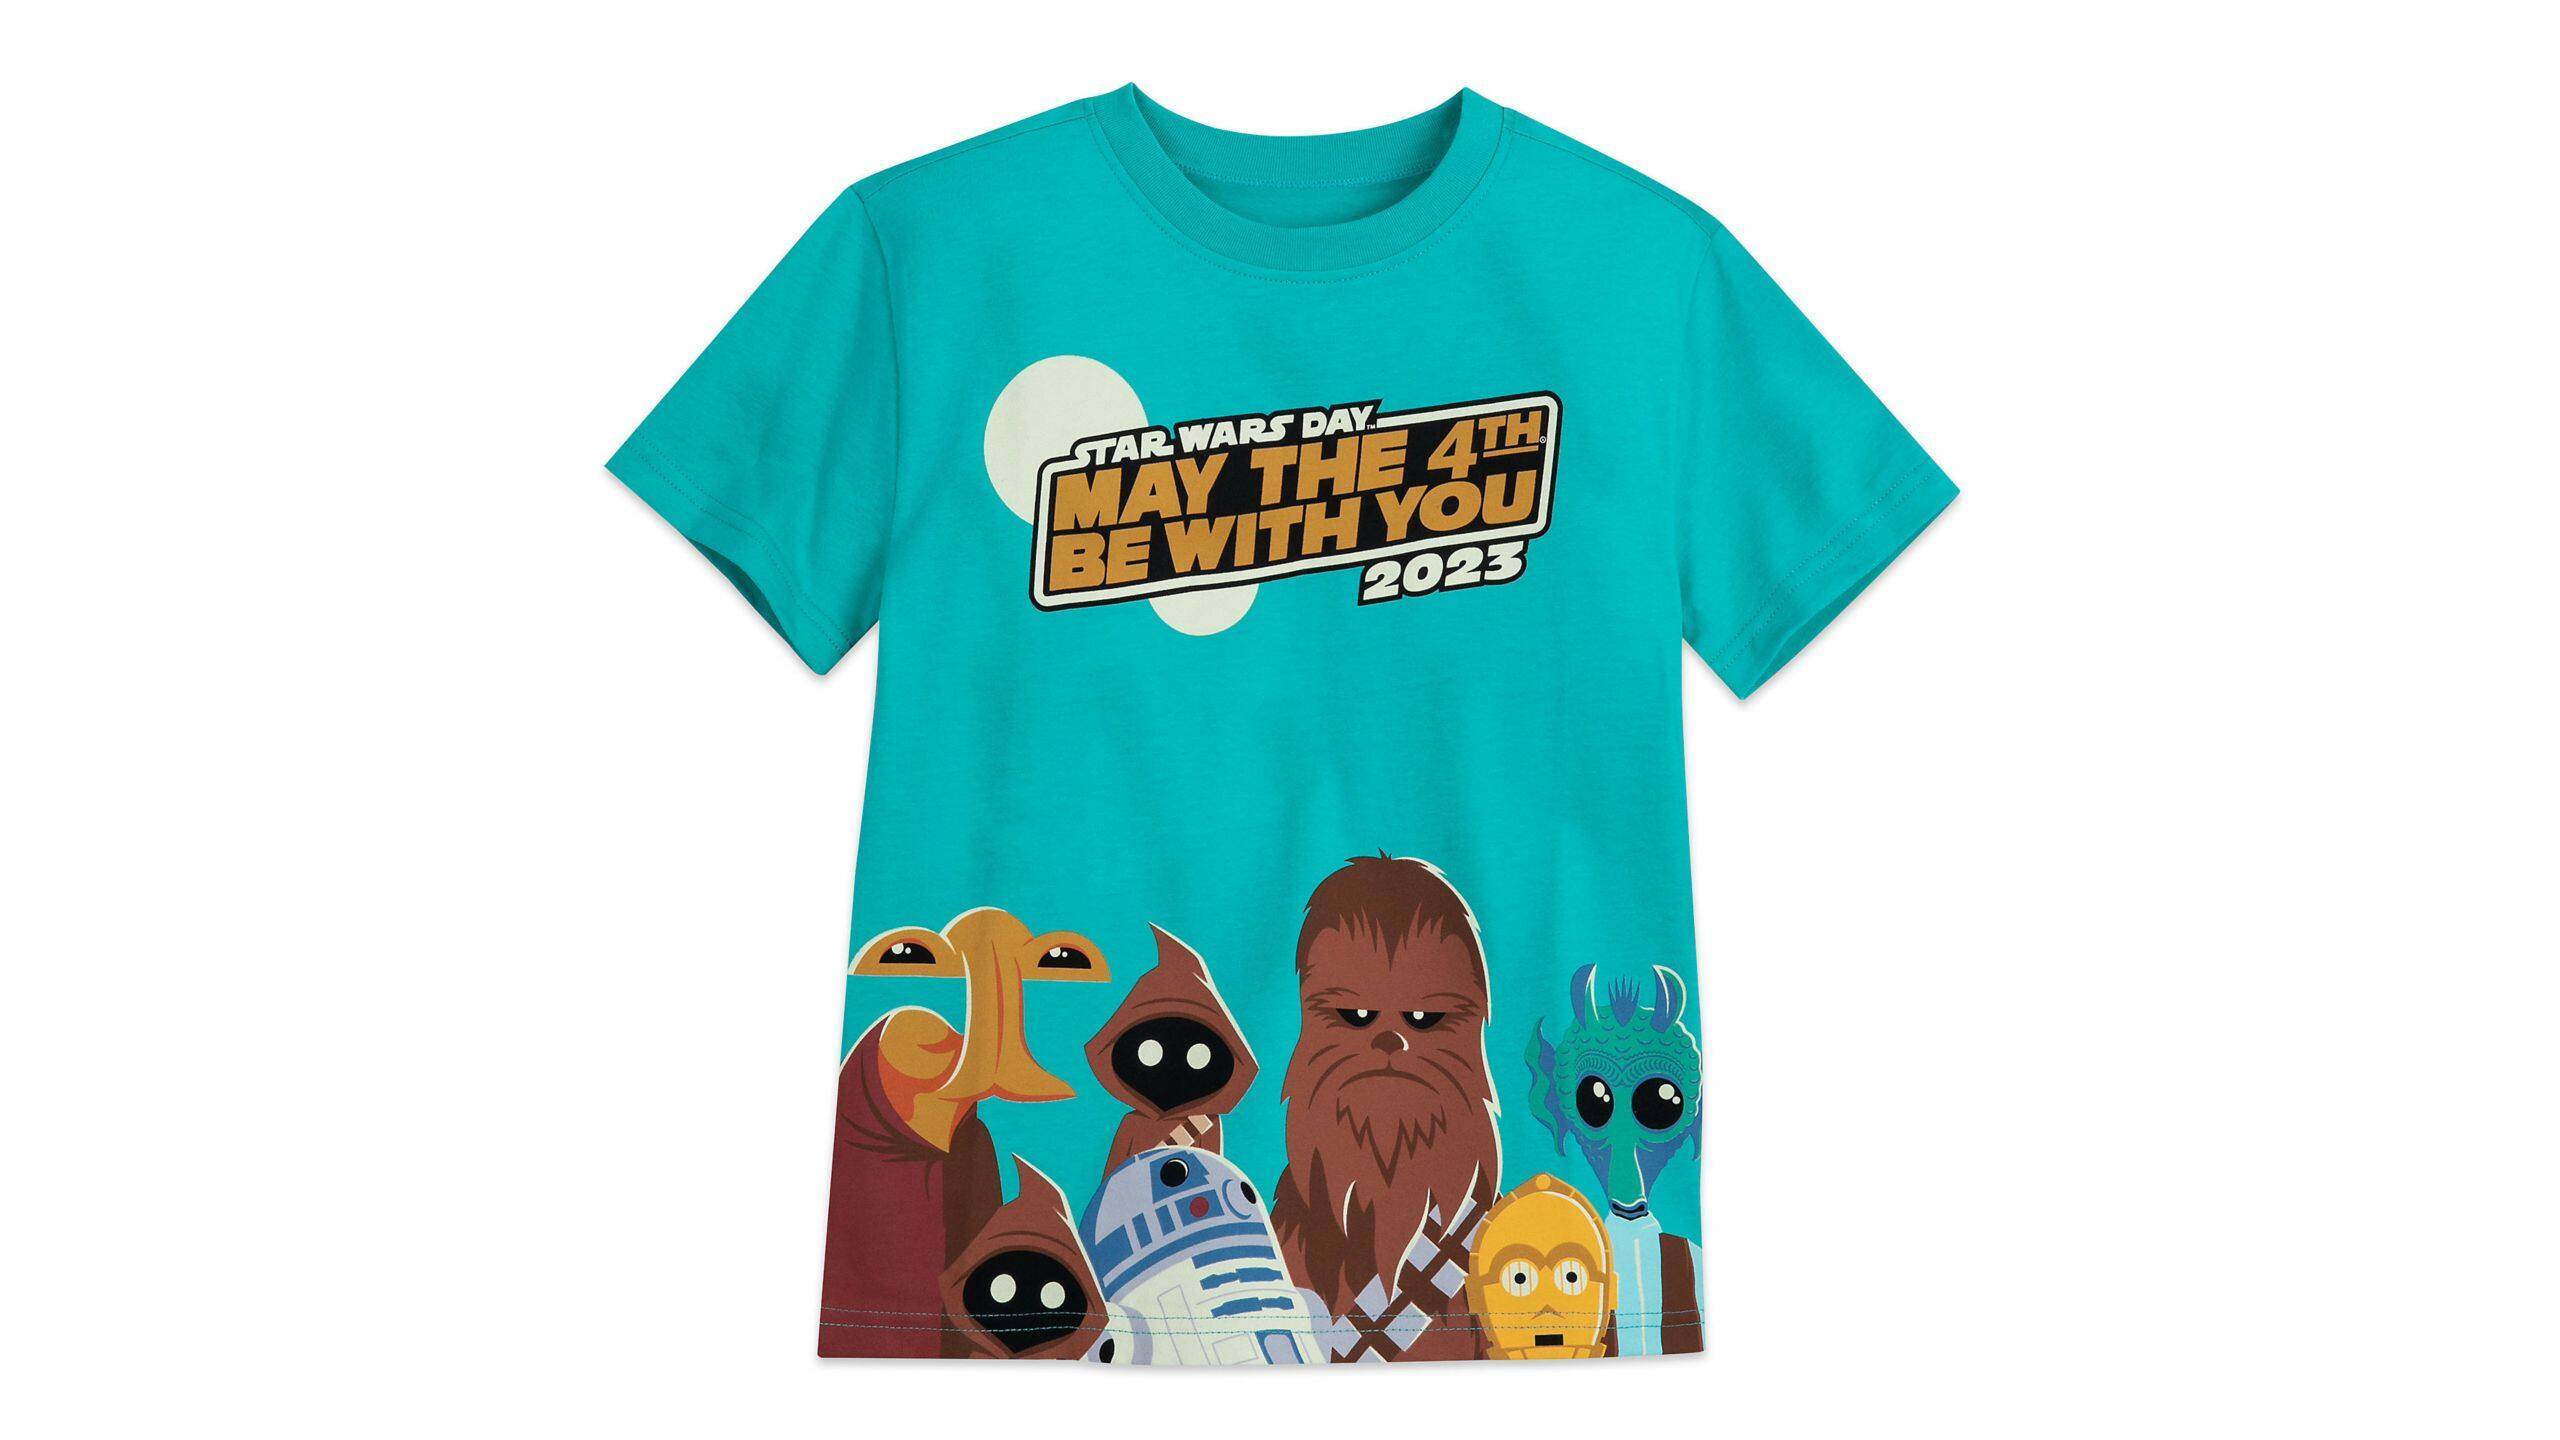 May the 4th Merchandise Event